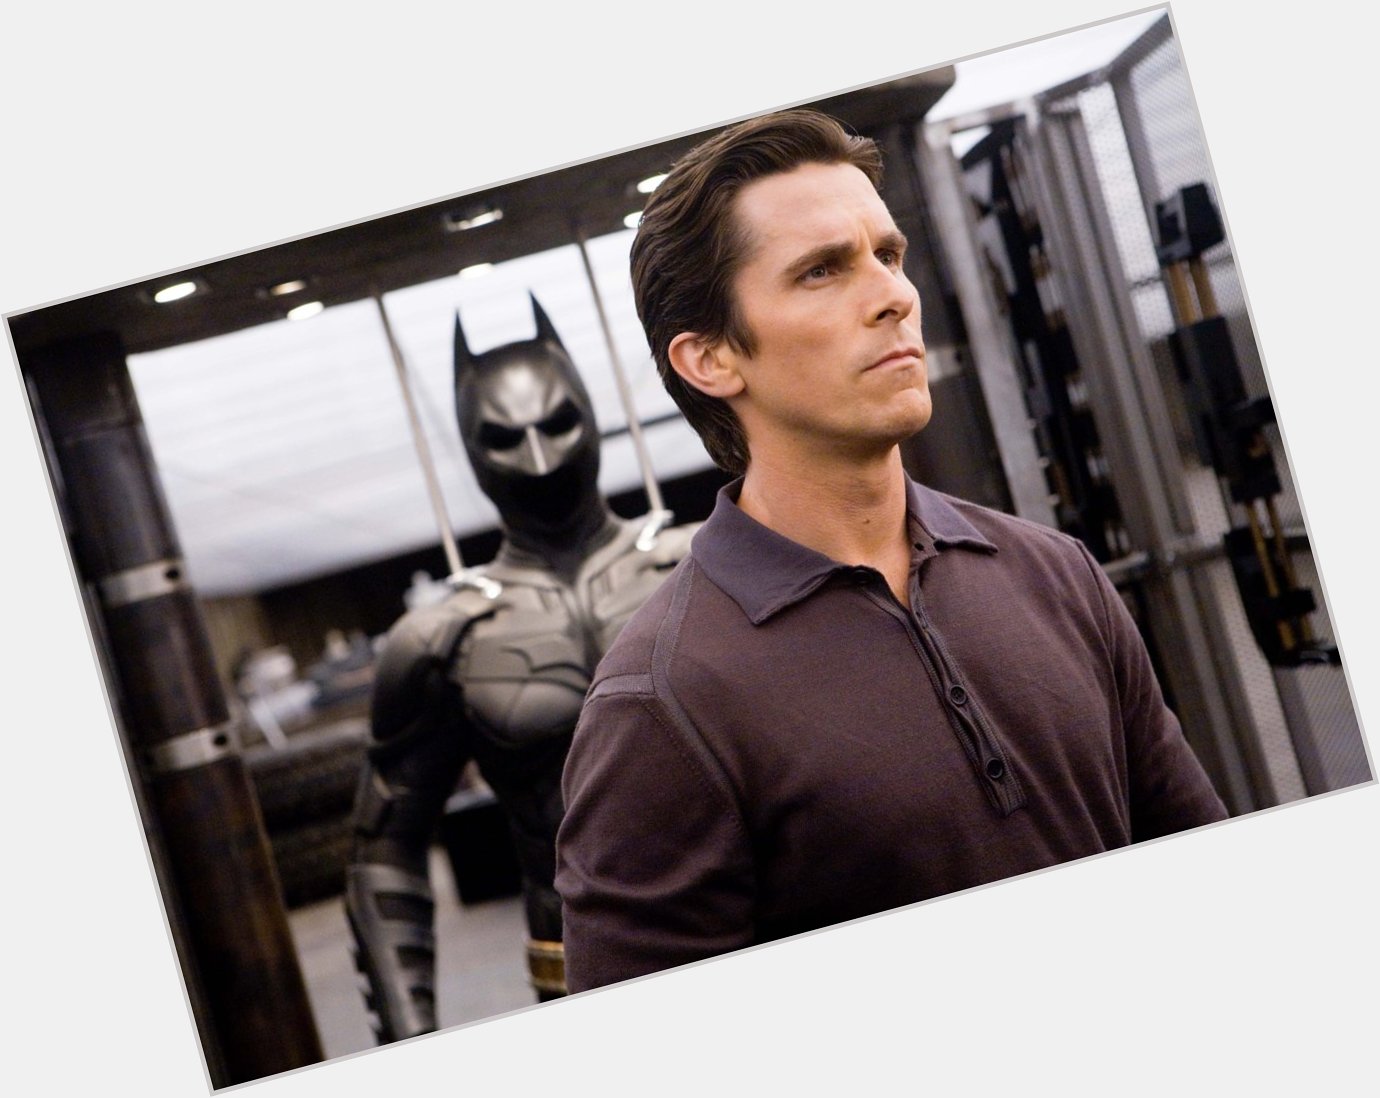 Happy Birthday to Christian Bale, the man behind the mask! 